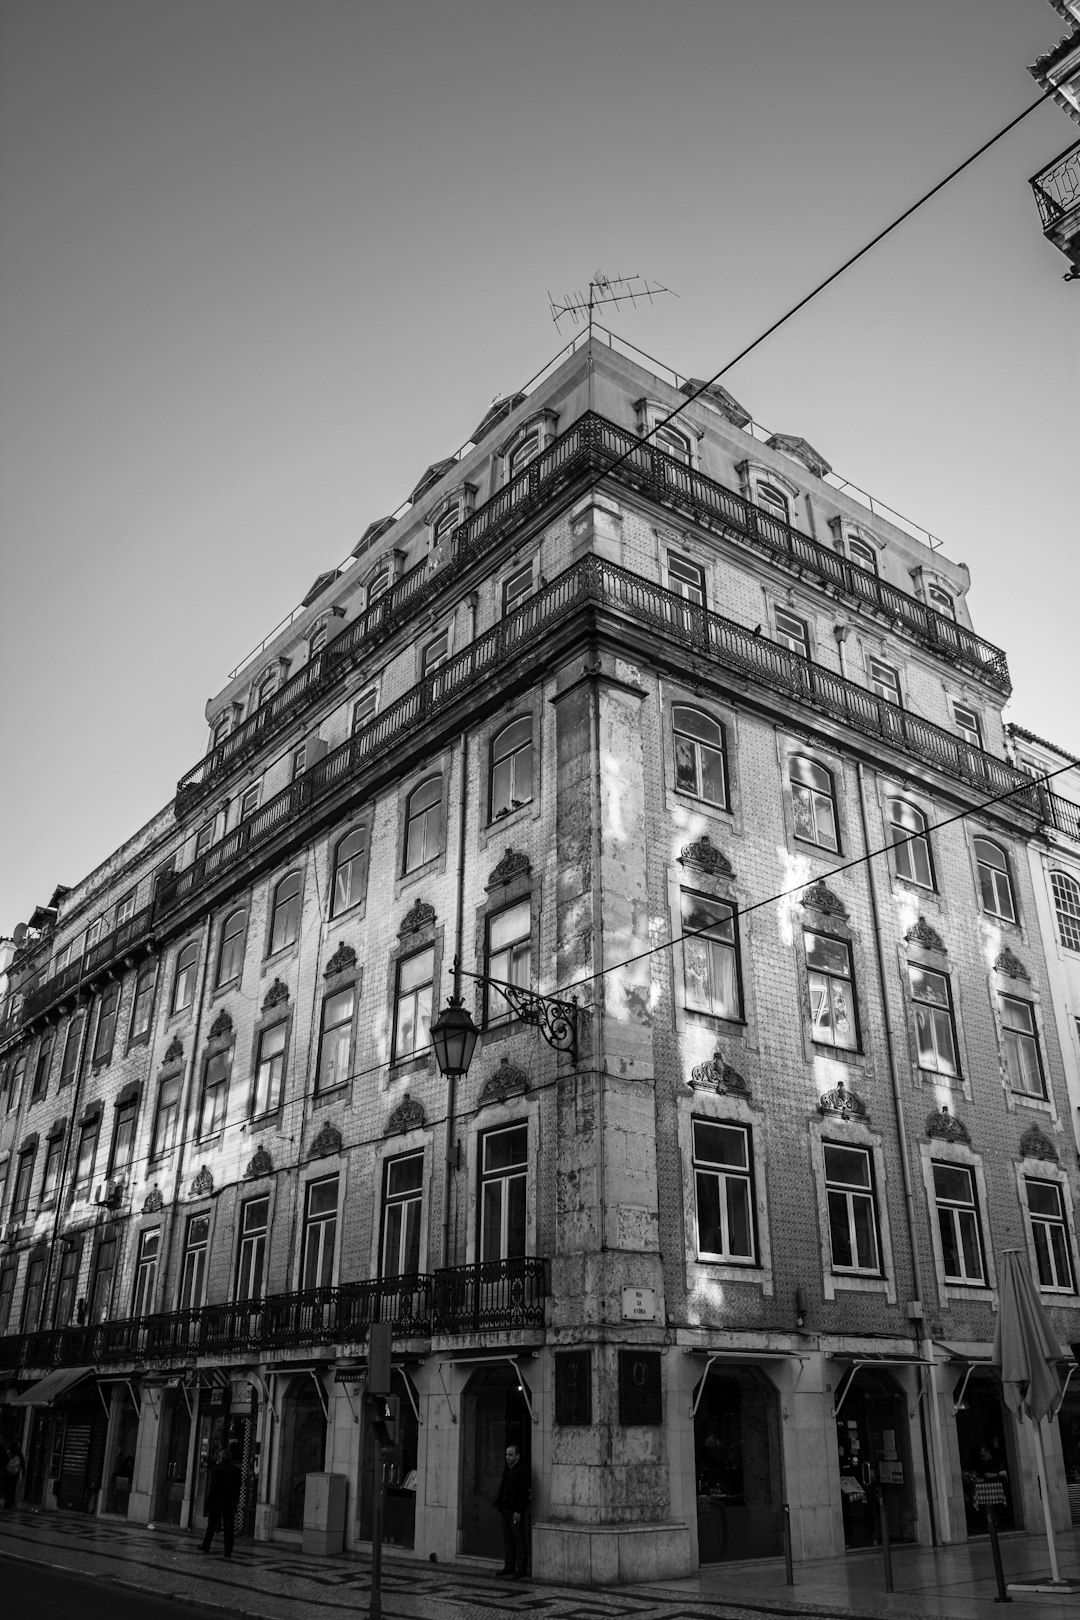 A historic building that stood the test of time in the centre of Lisbon